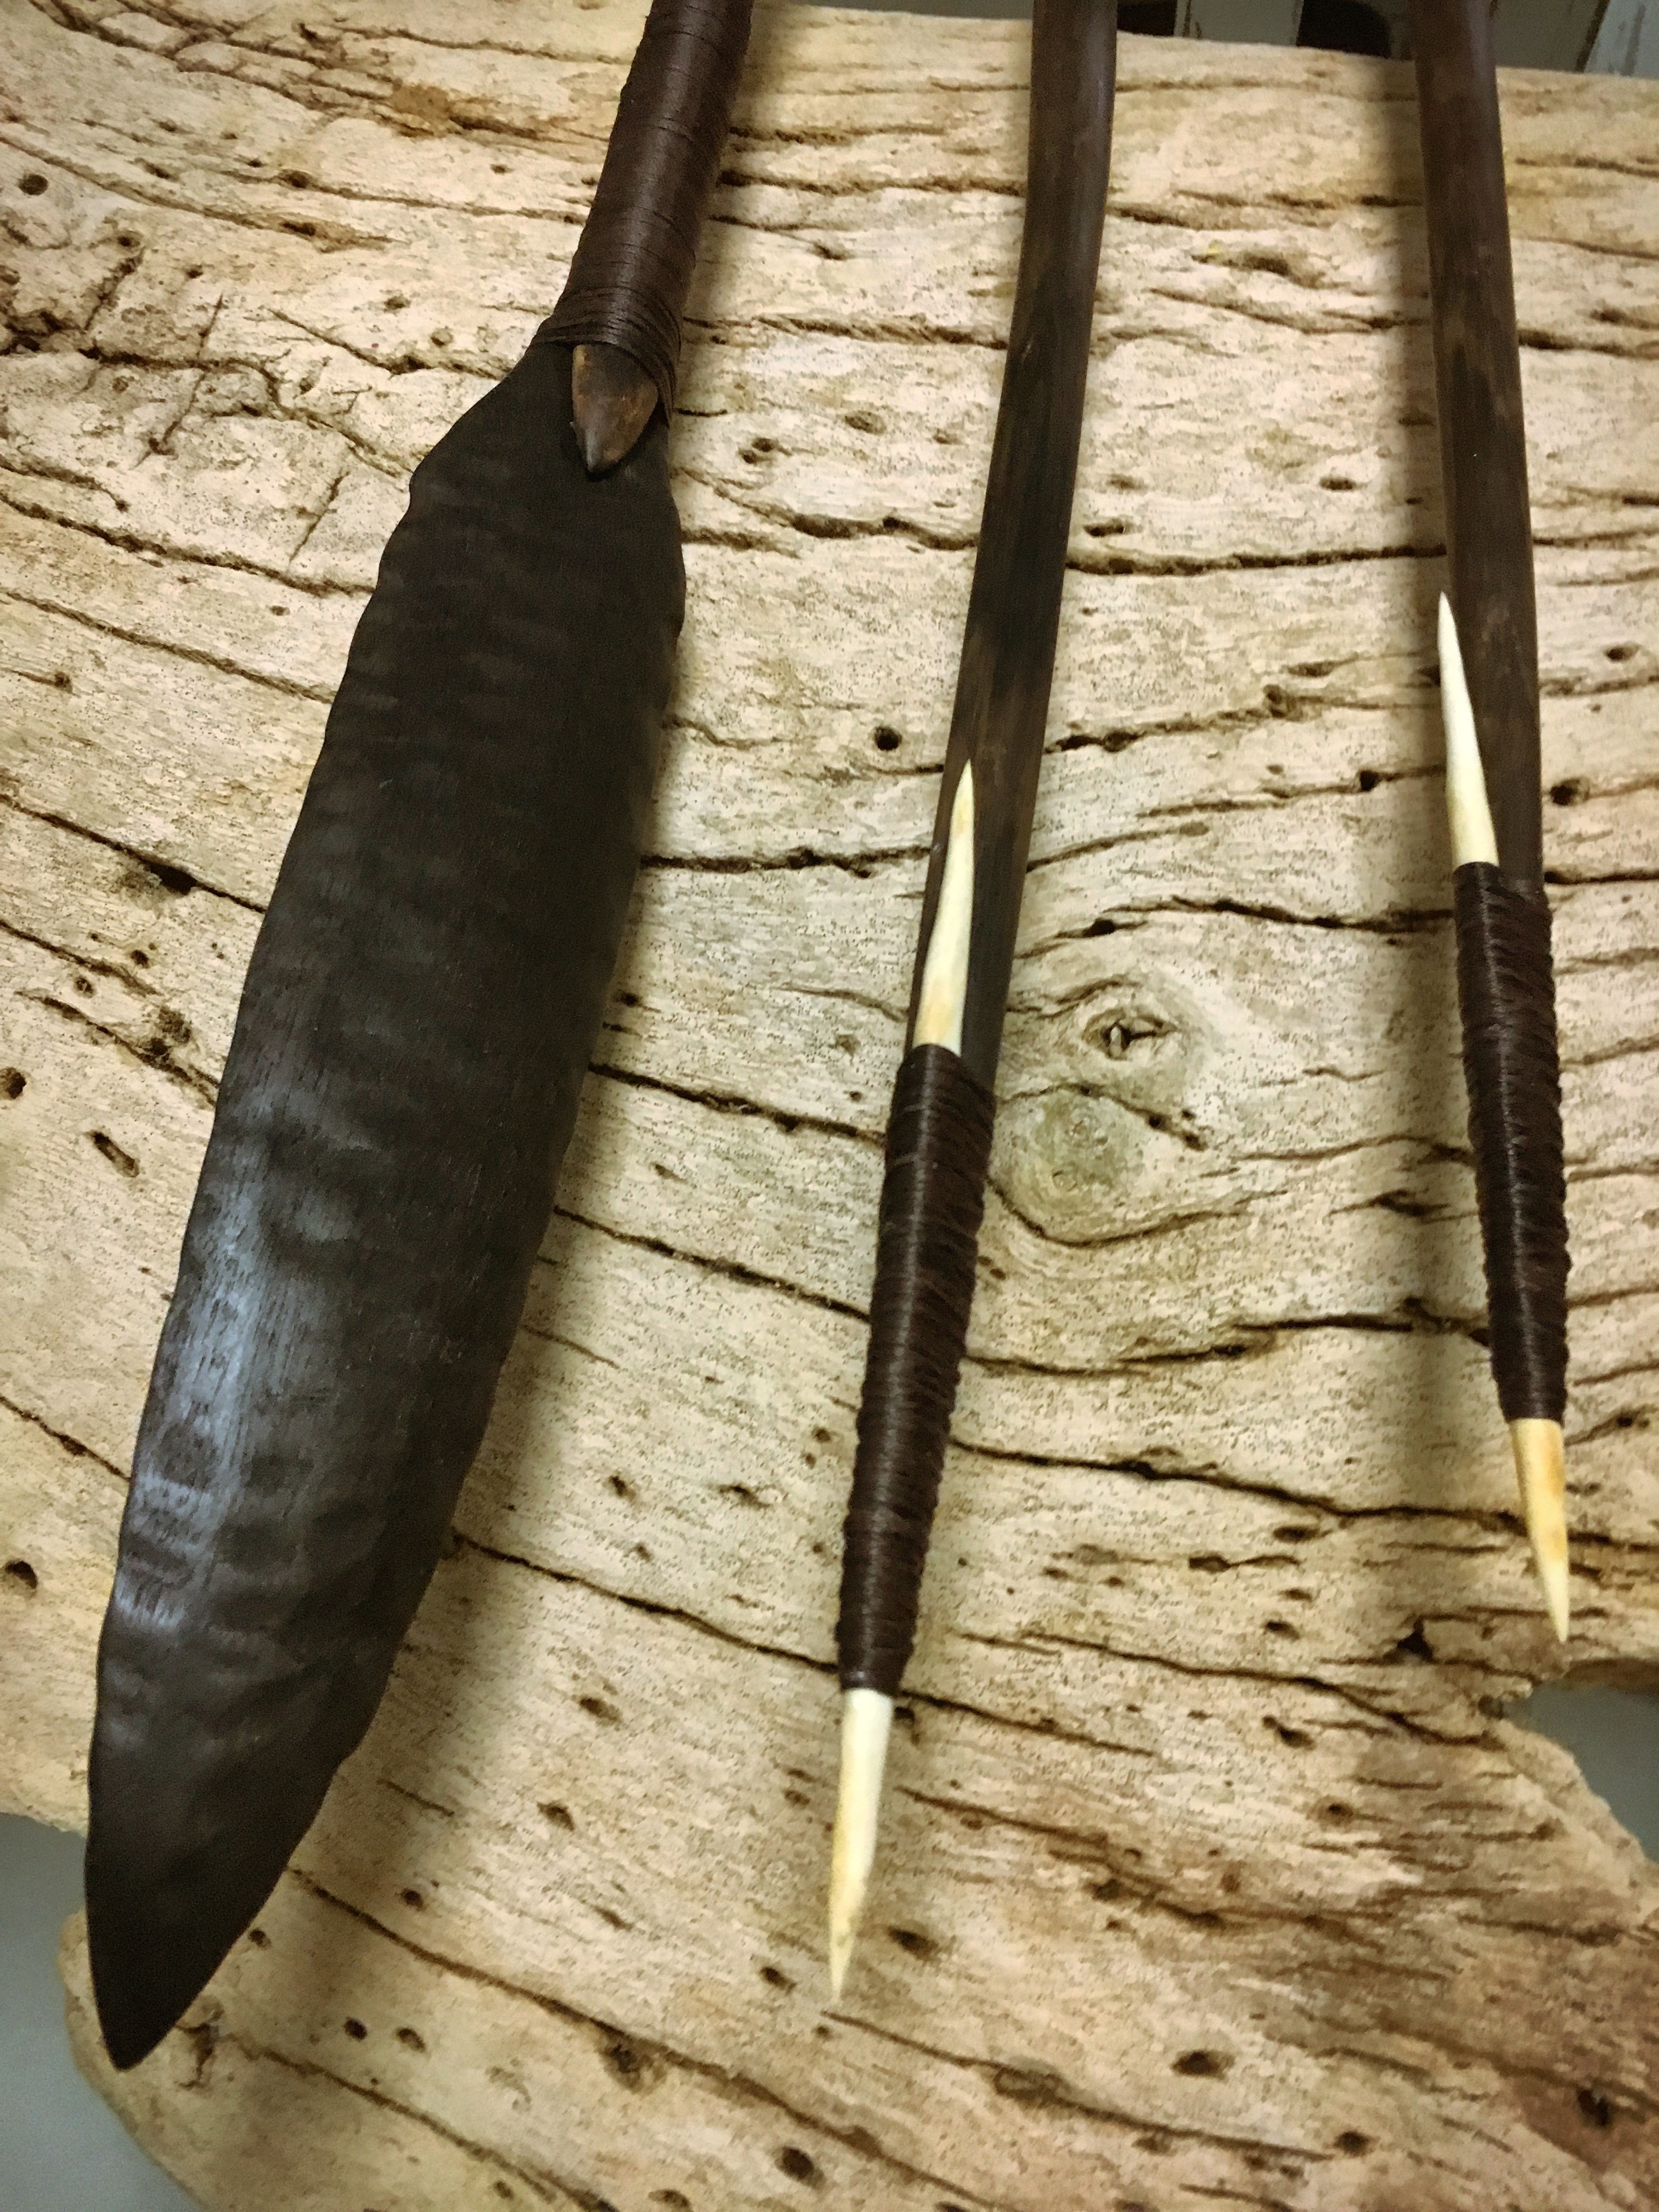 the tips of three spears rest on a smoothed out wooden plank, the left most spear is tipped with a flat broad head the two right most spears are tipped with a thin fine bone head.